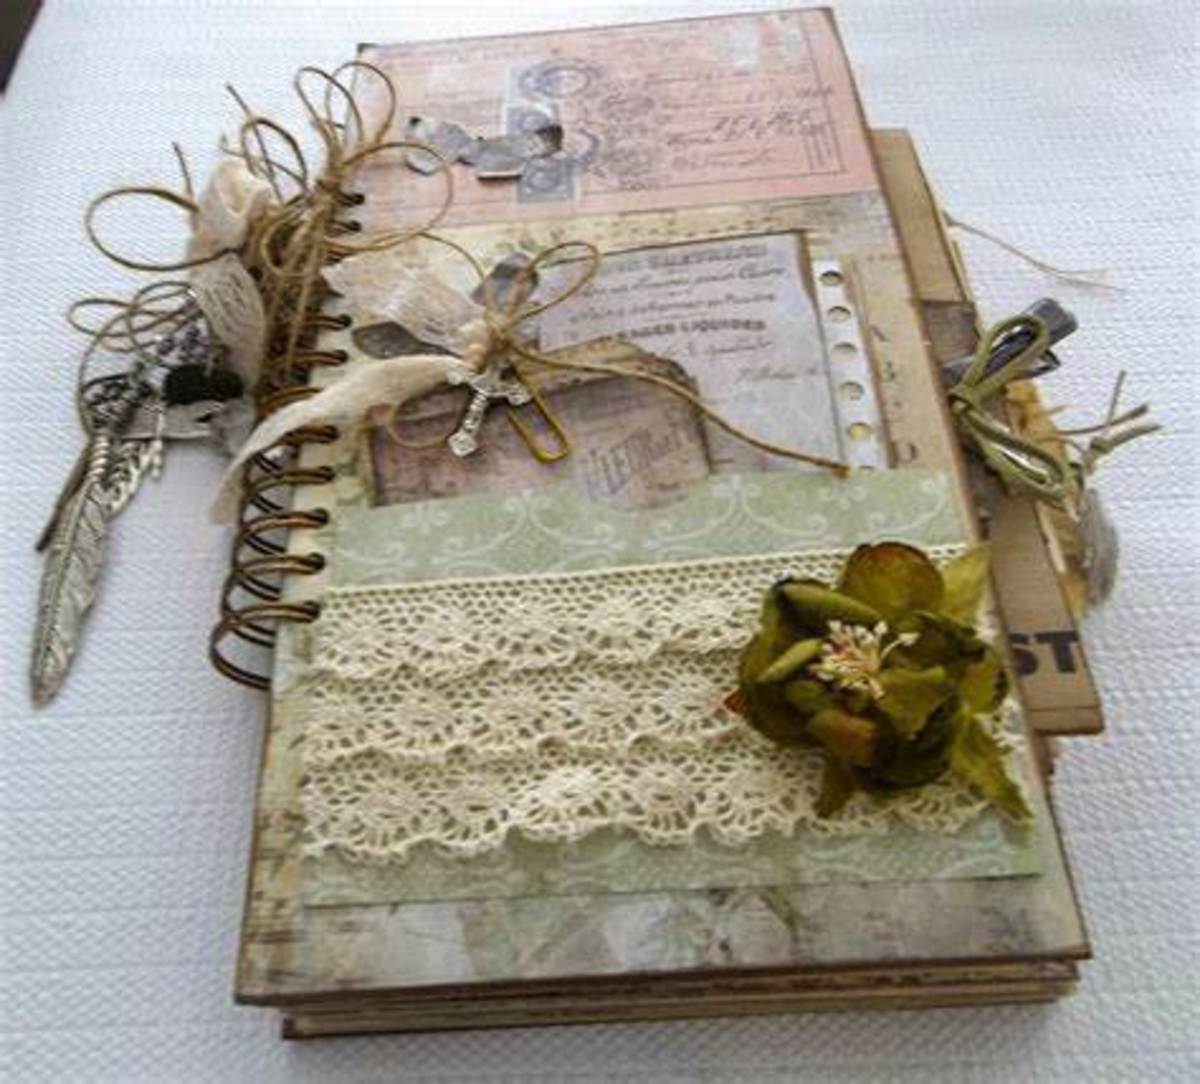 Using extra things that you have in your stash to create a piece of art is what junk journals are about.